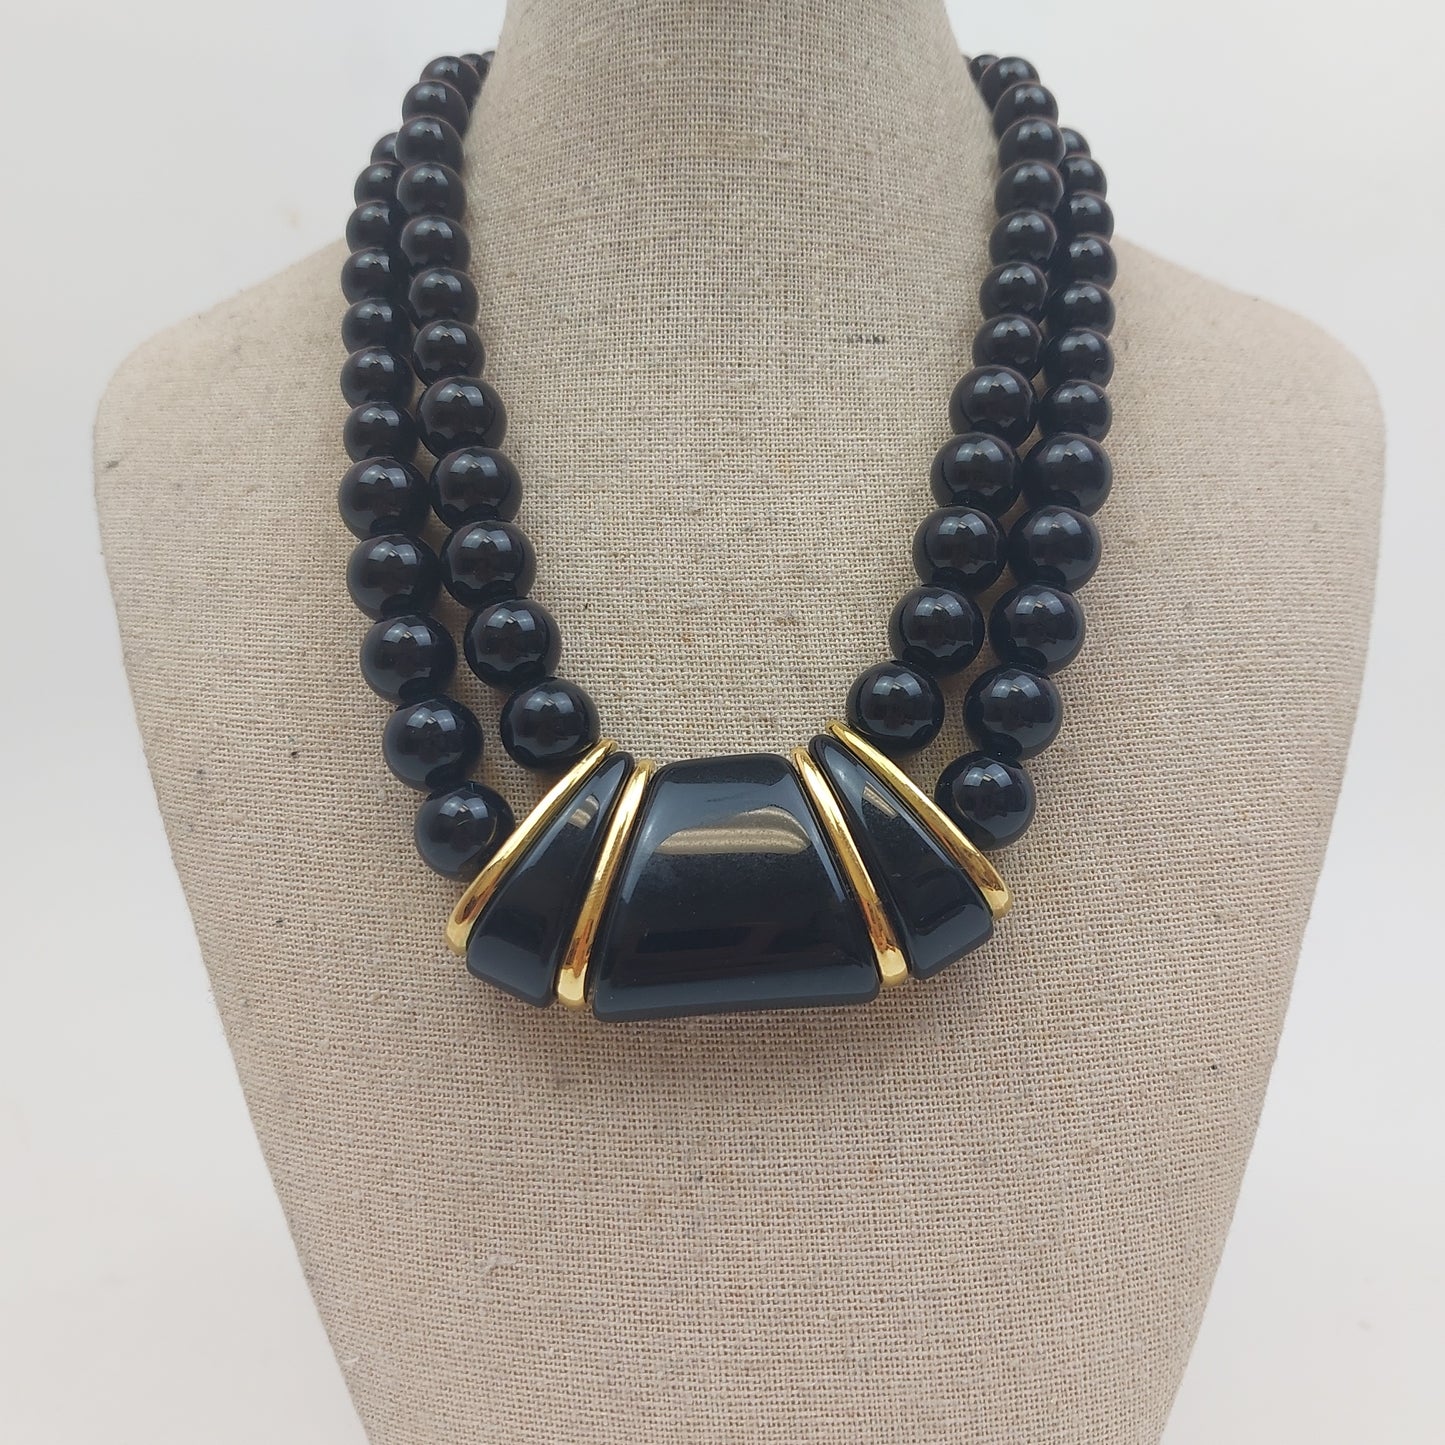 Vintage Bead Necklace with Exquisite Gold Detailing 18-Inch Black